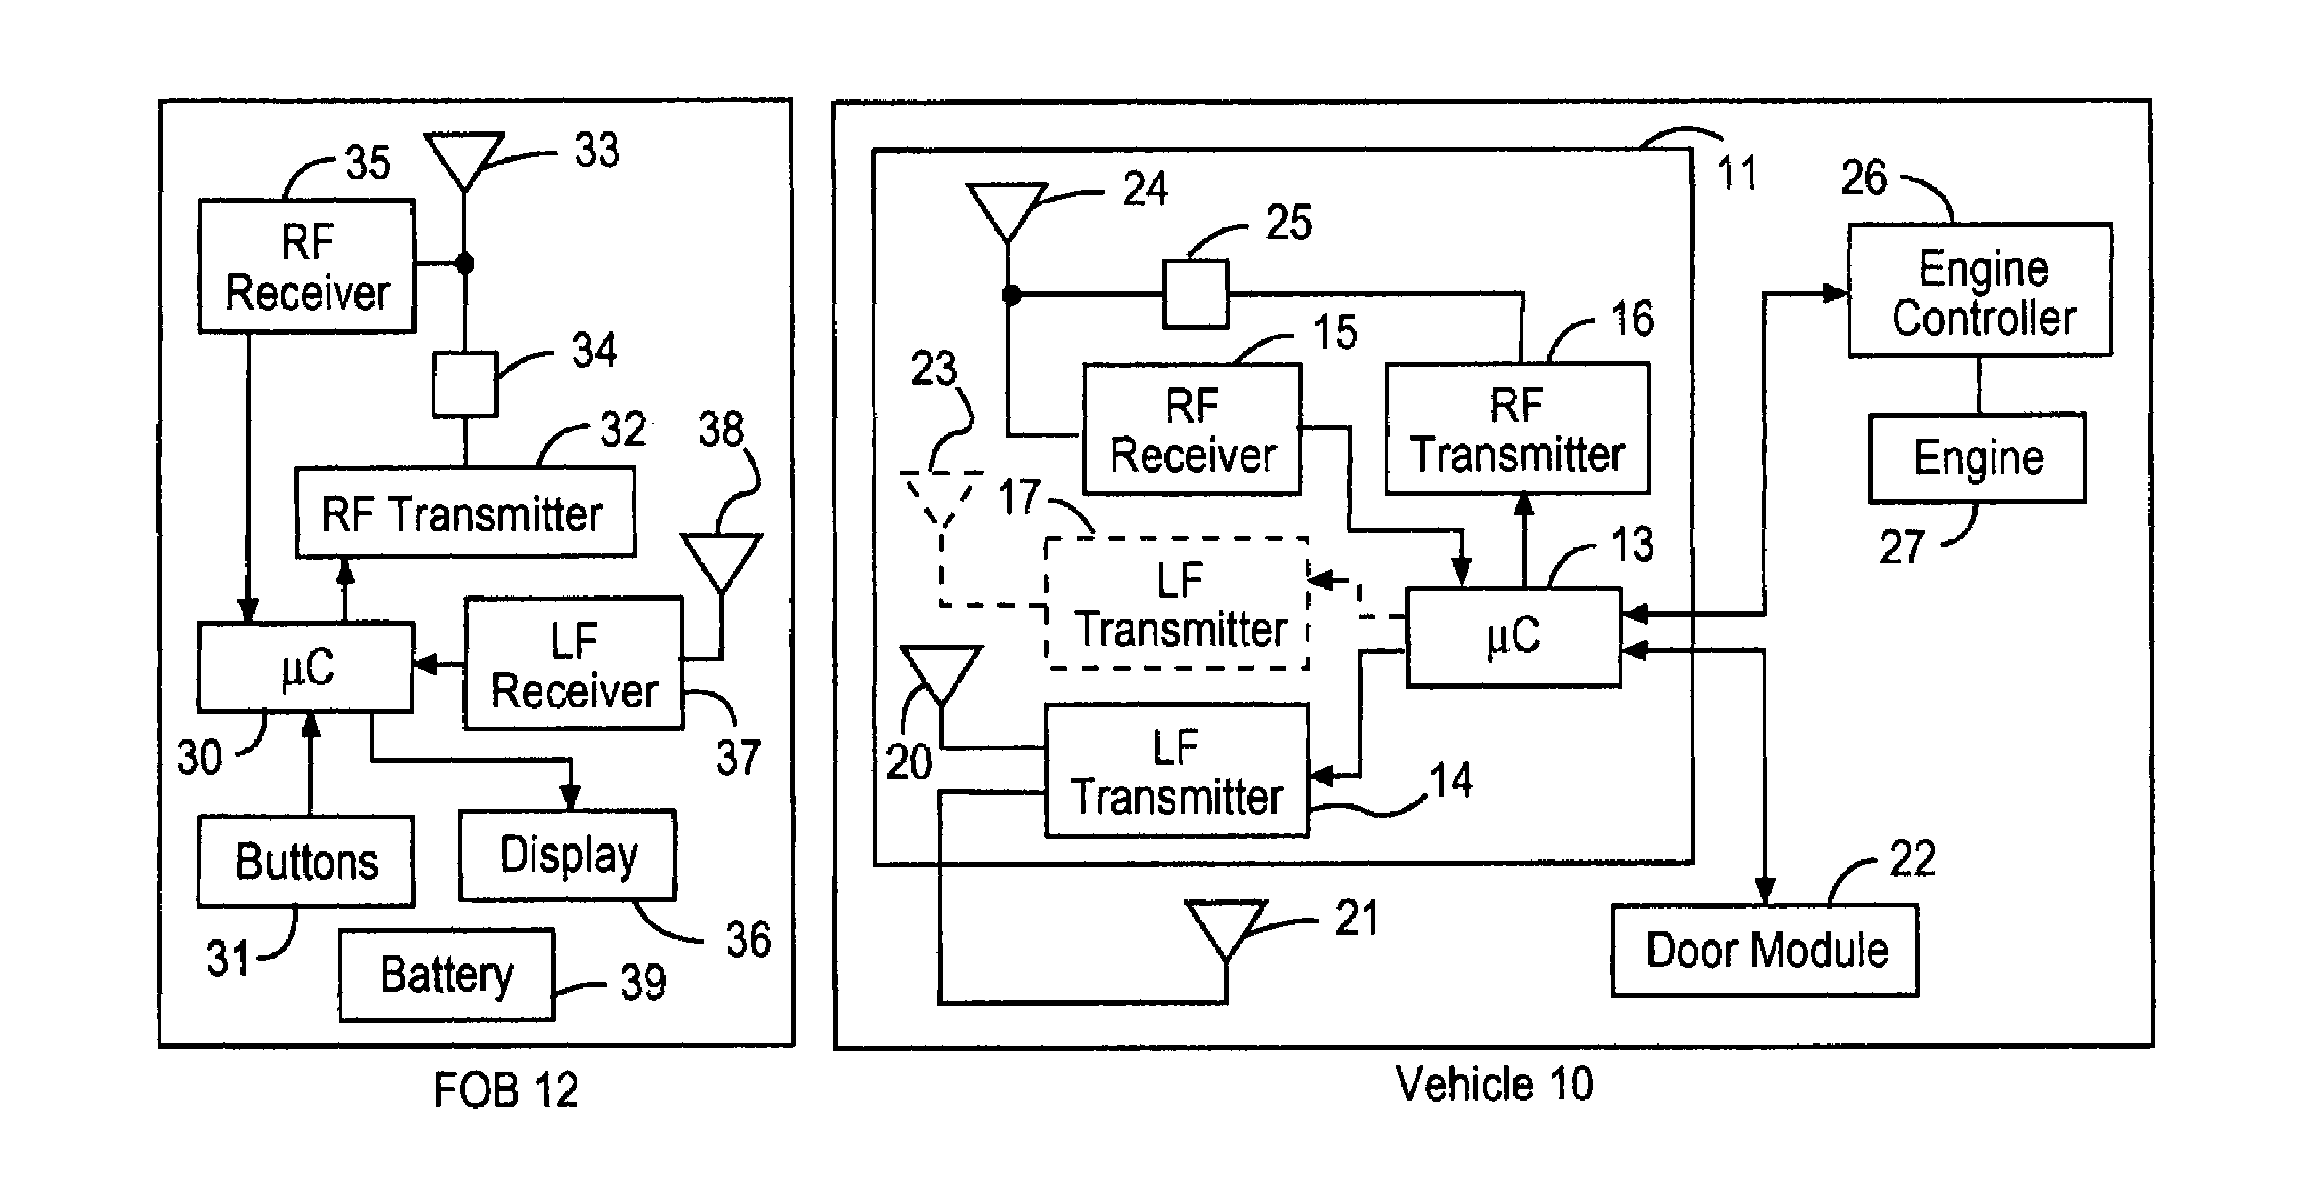 Integrated passive entry and remote keyless entry system